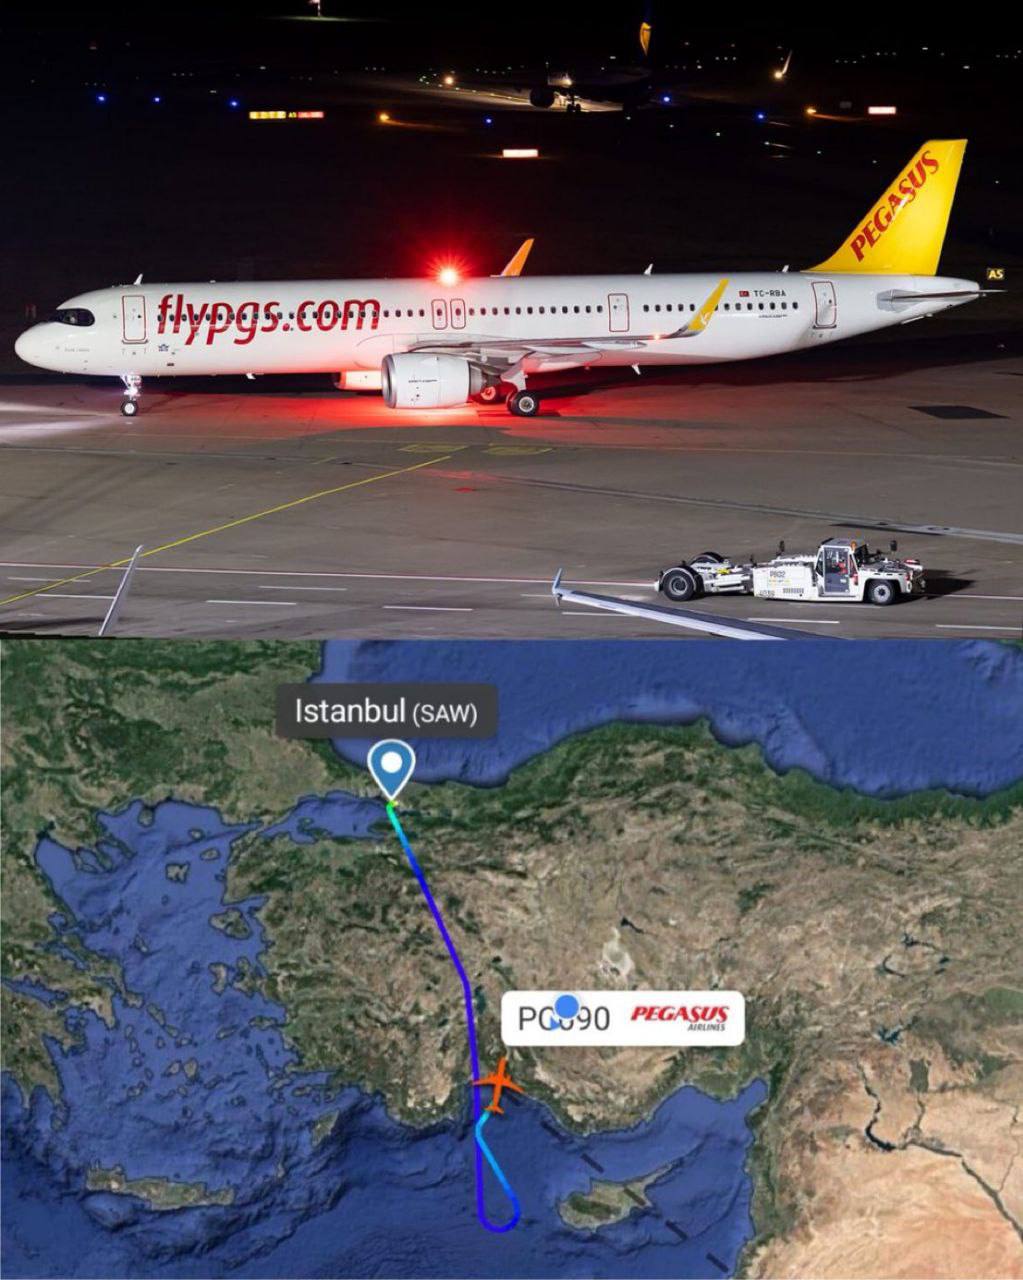 The plane made an emergency landing in Antalya due to cries for help from the luggage compartment